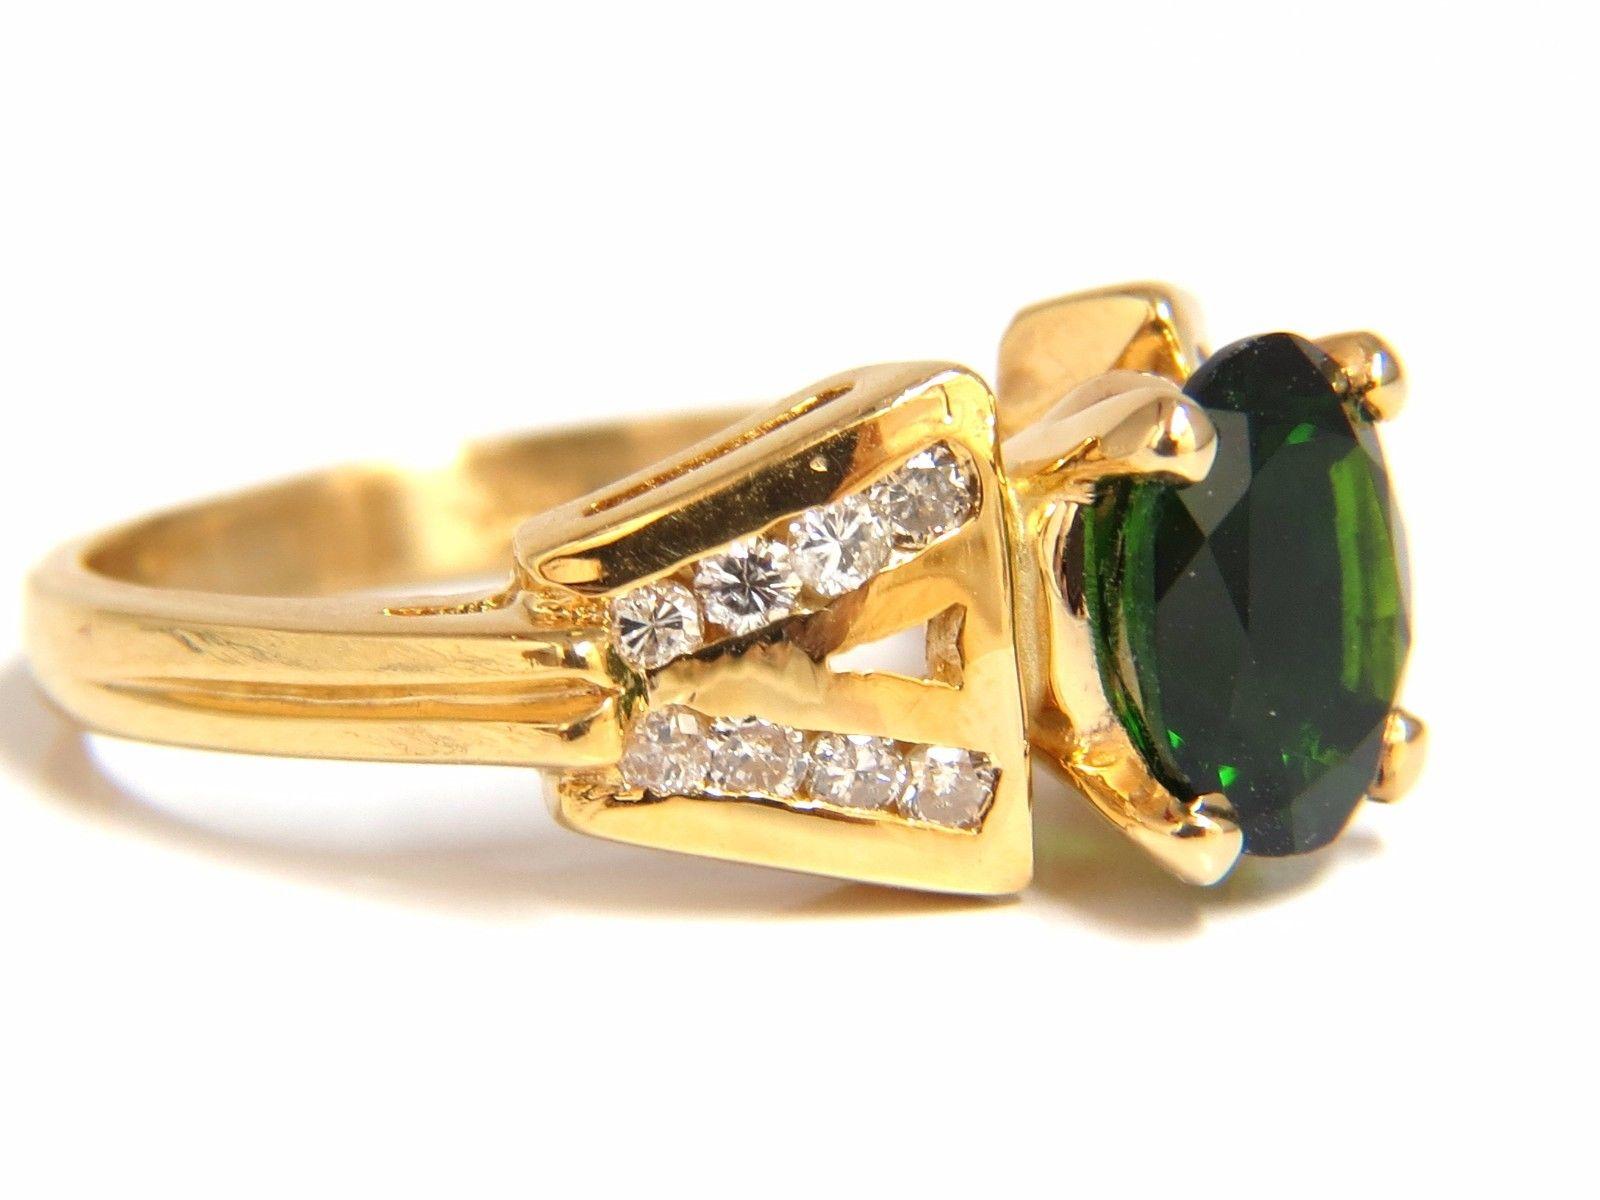 Oval Cut GIA Certified 2.49ct Natural vivid Green Chrome Diopside diamonds ring 14kt